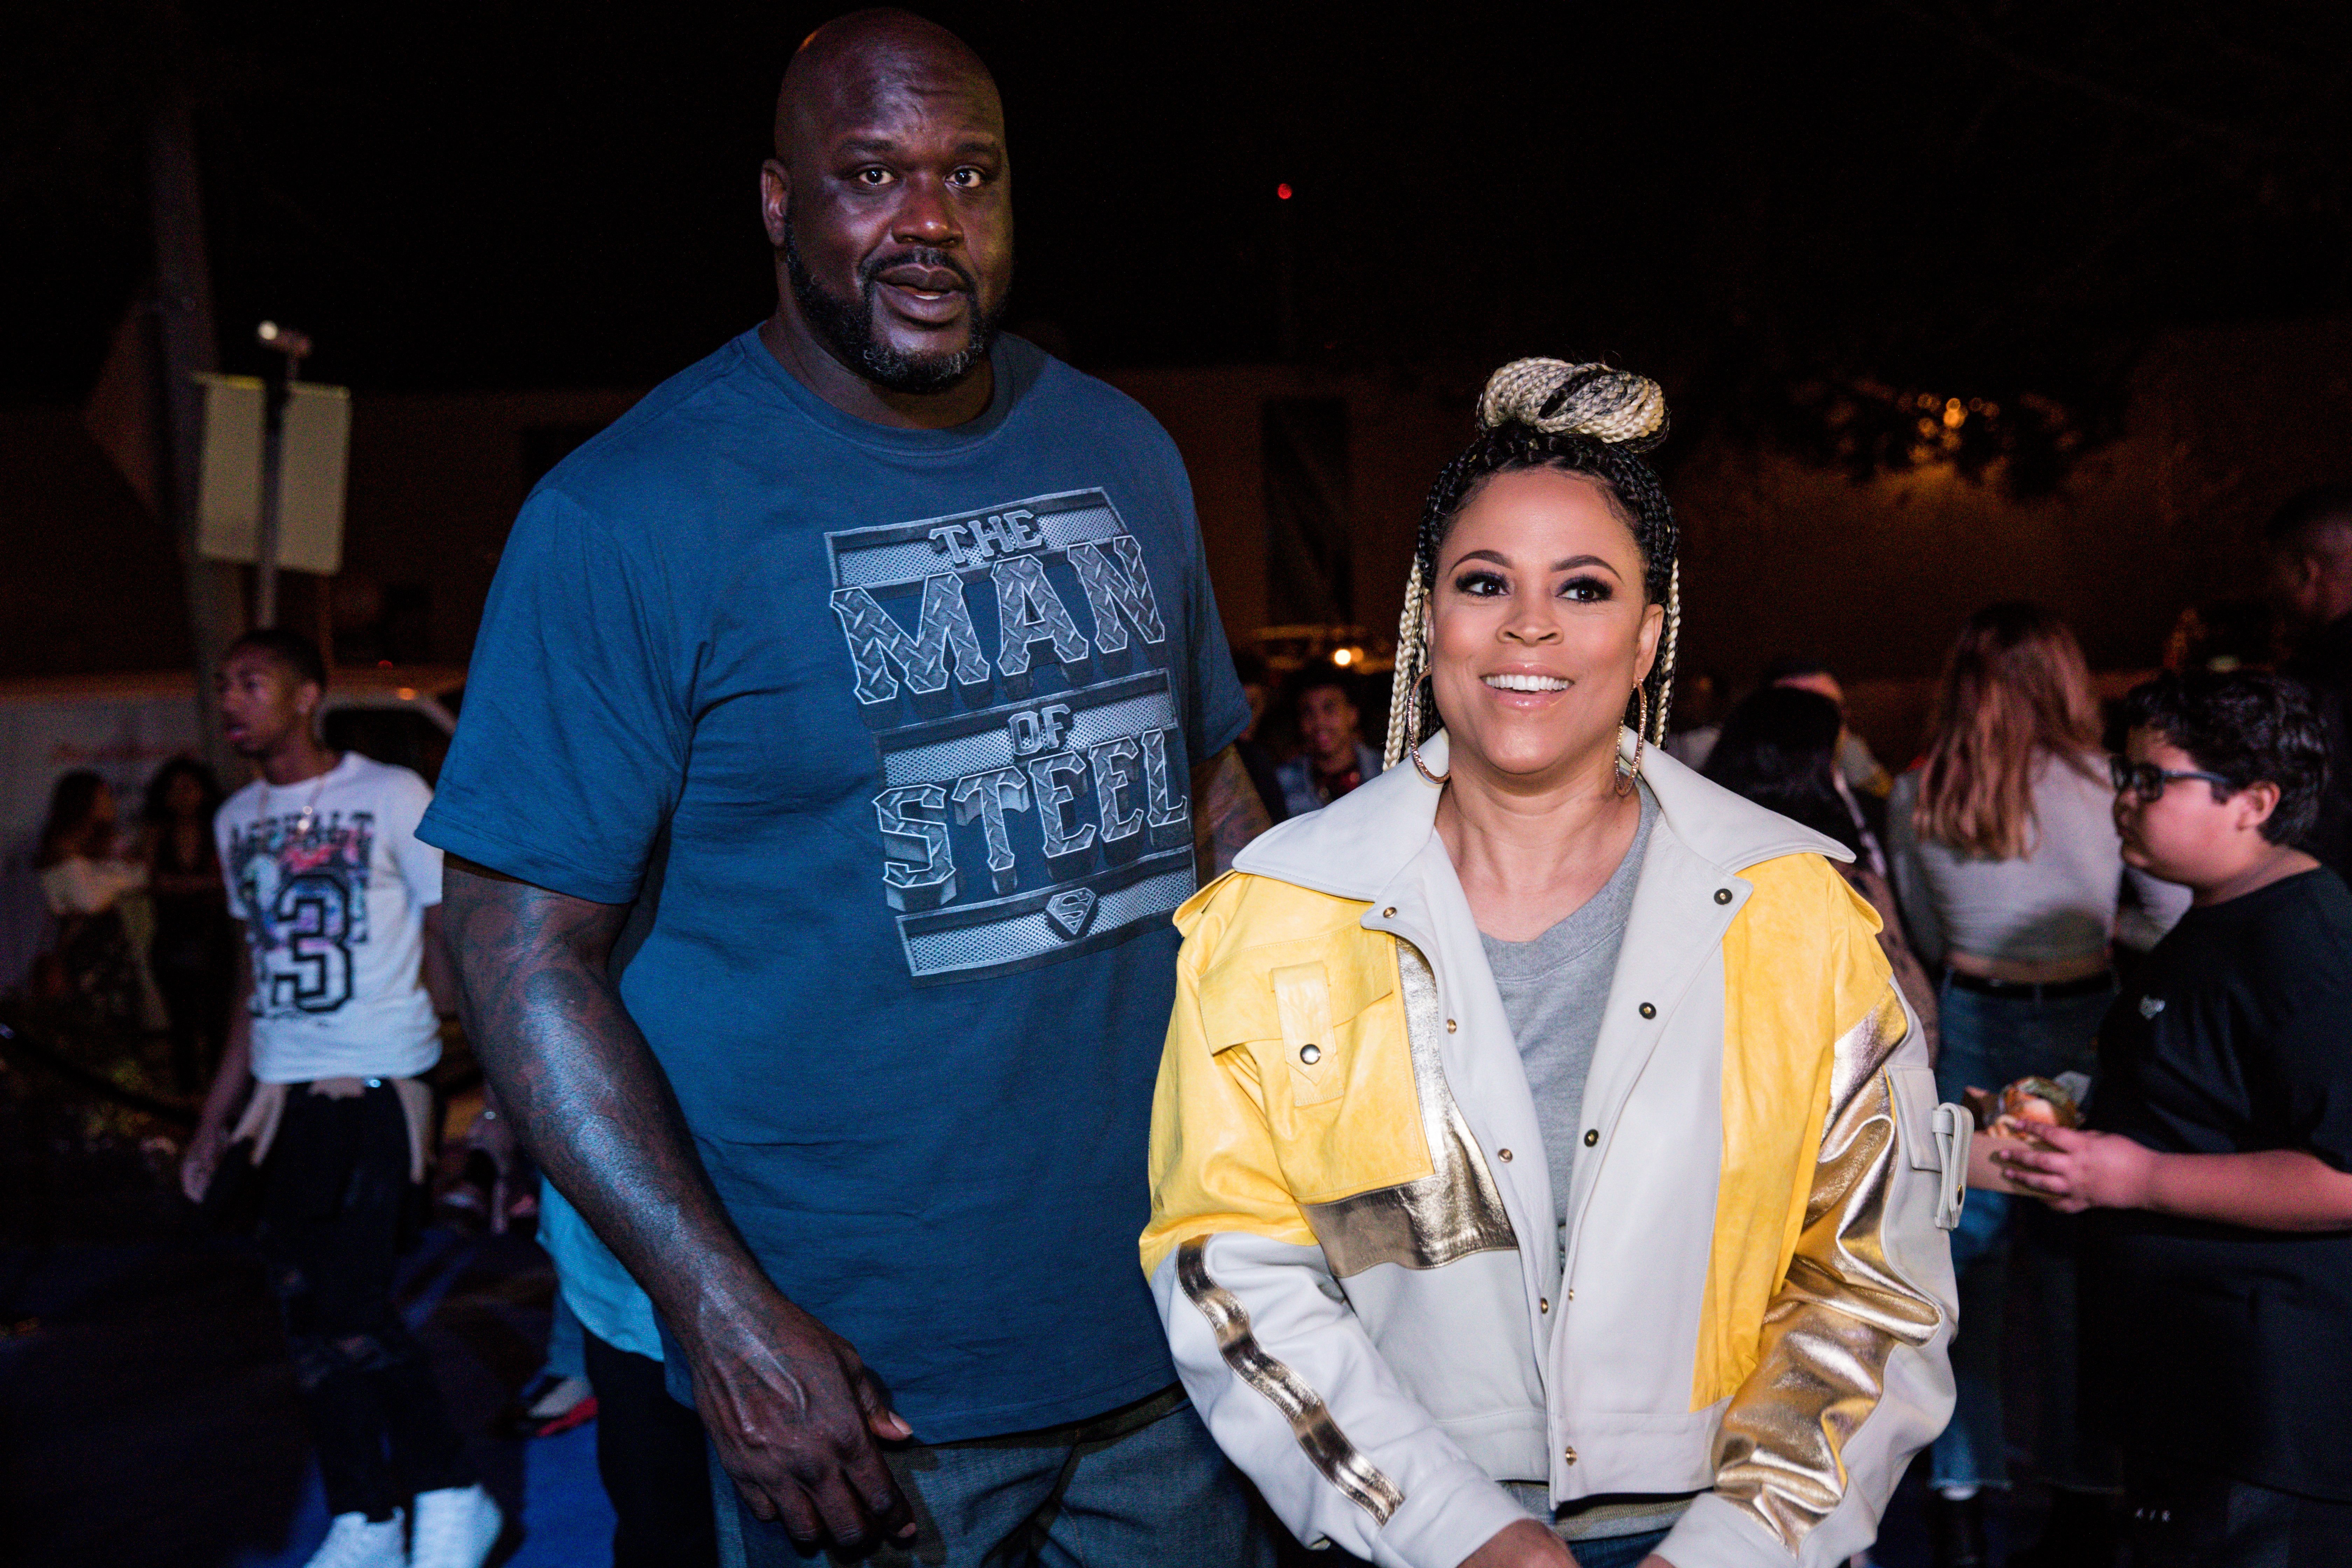 Shaunie and Shaquille O'Neal celebrate Shareef O'Neal's 18th birthday party on January 13, 2018. | Photo: GettyImages